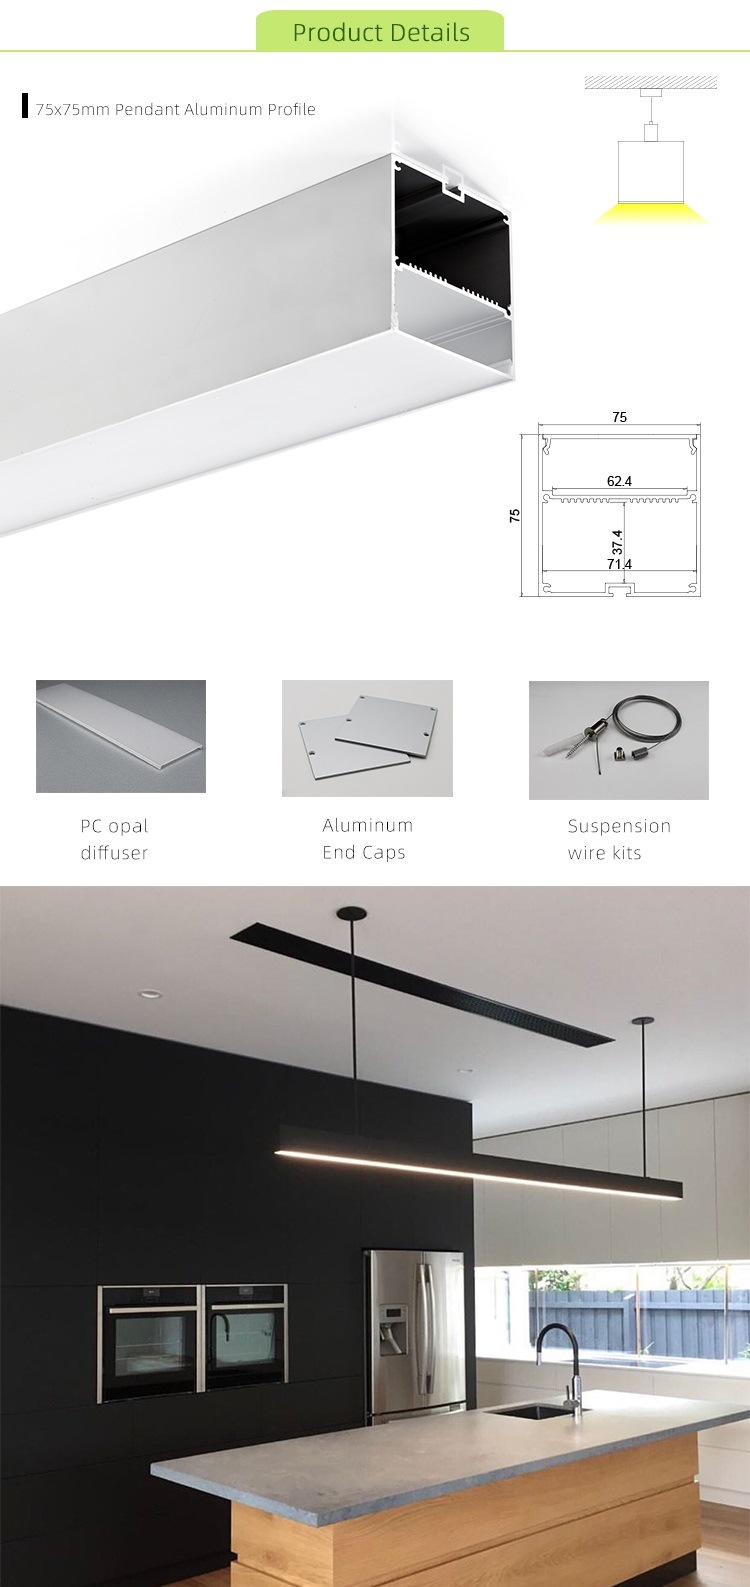 75X75mm Pendant Square Aluminum LED Profile with PC Opal Diffuser for LED Strip Light